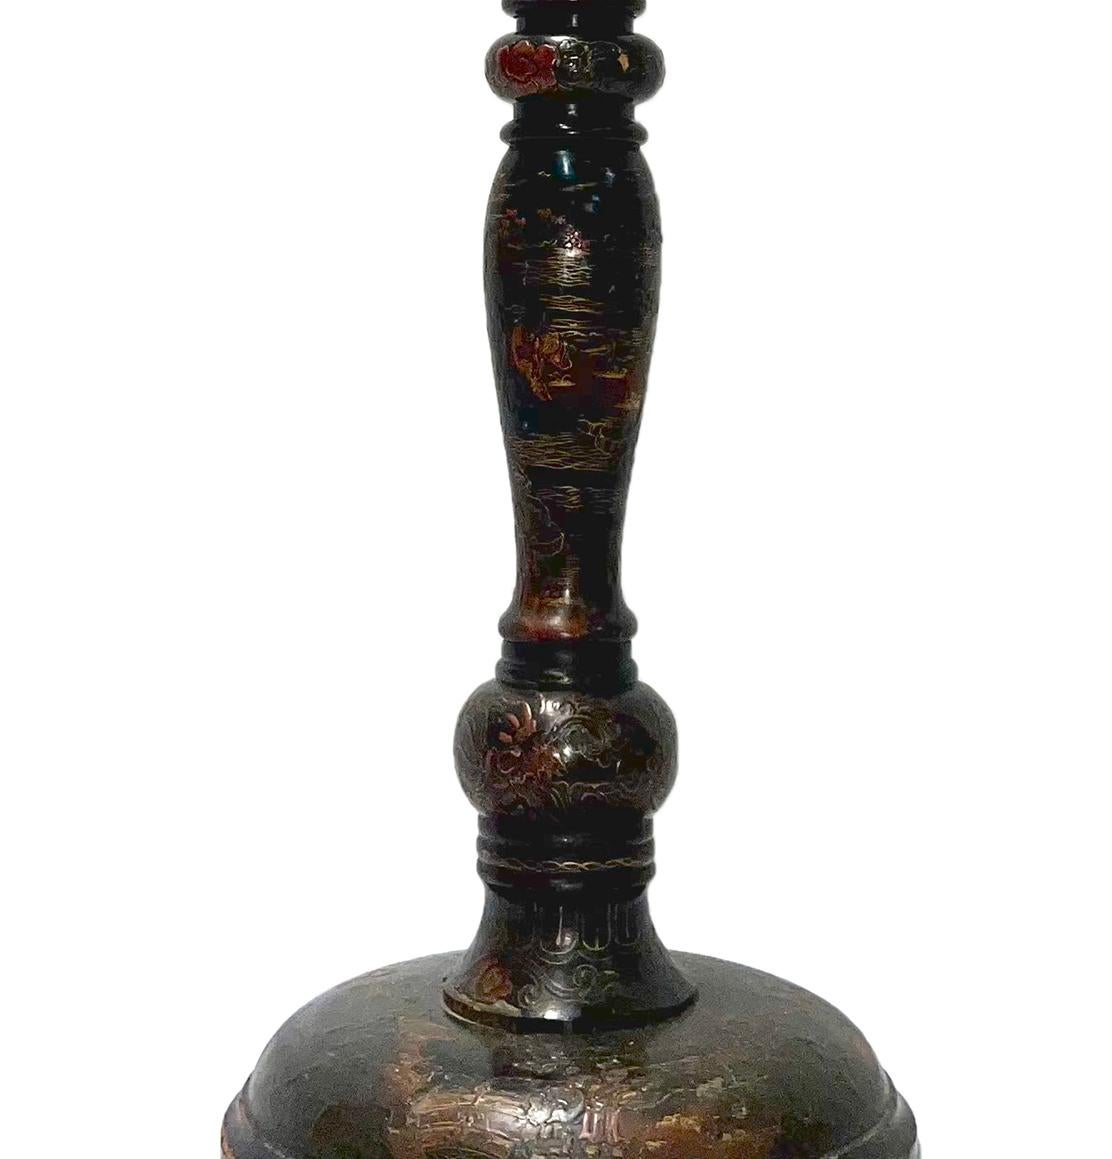 A circa 1920's English painted and lacquered floor lamp.

Measurements:
Height of body: 54